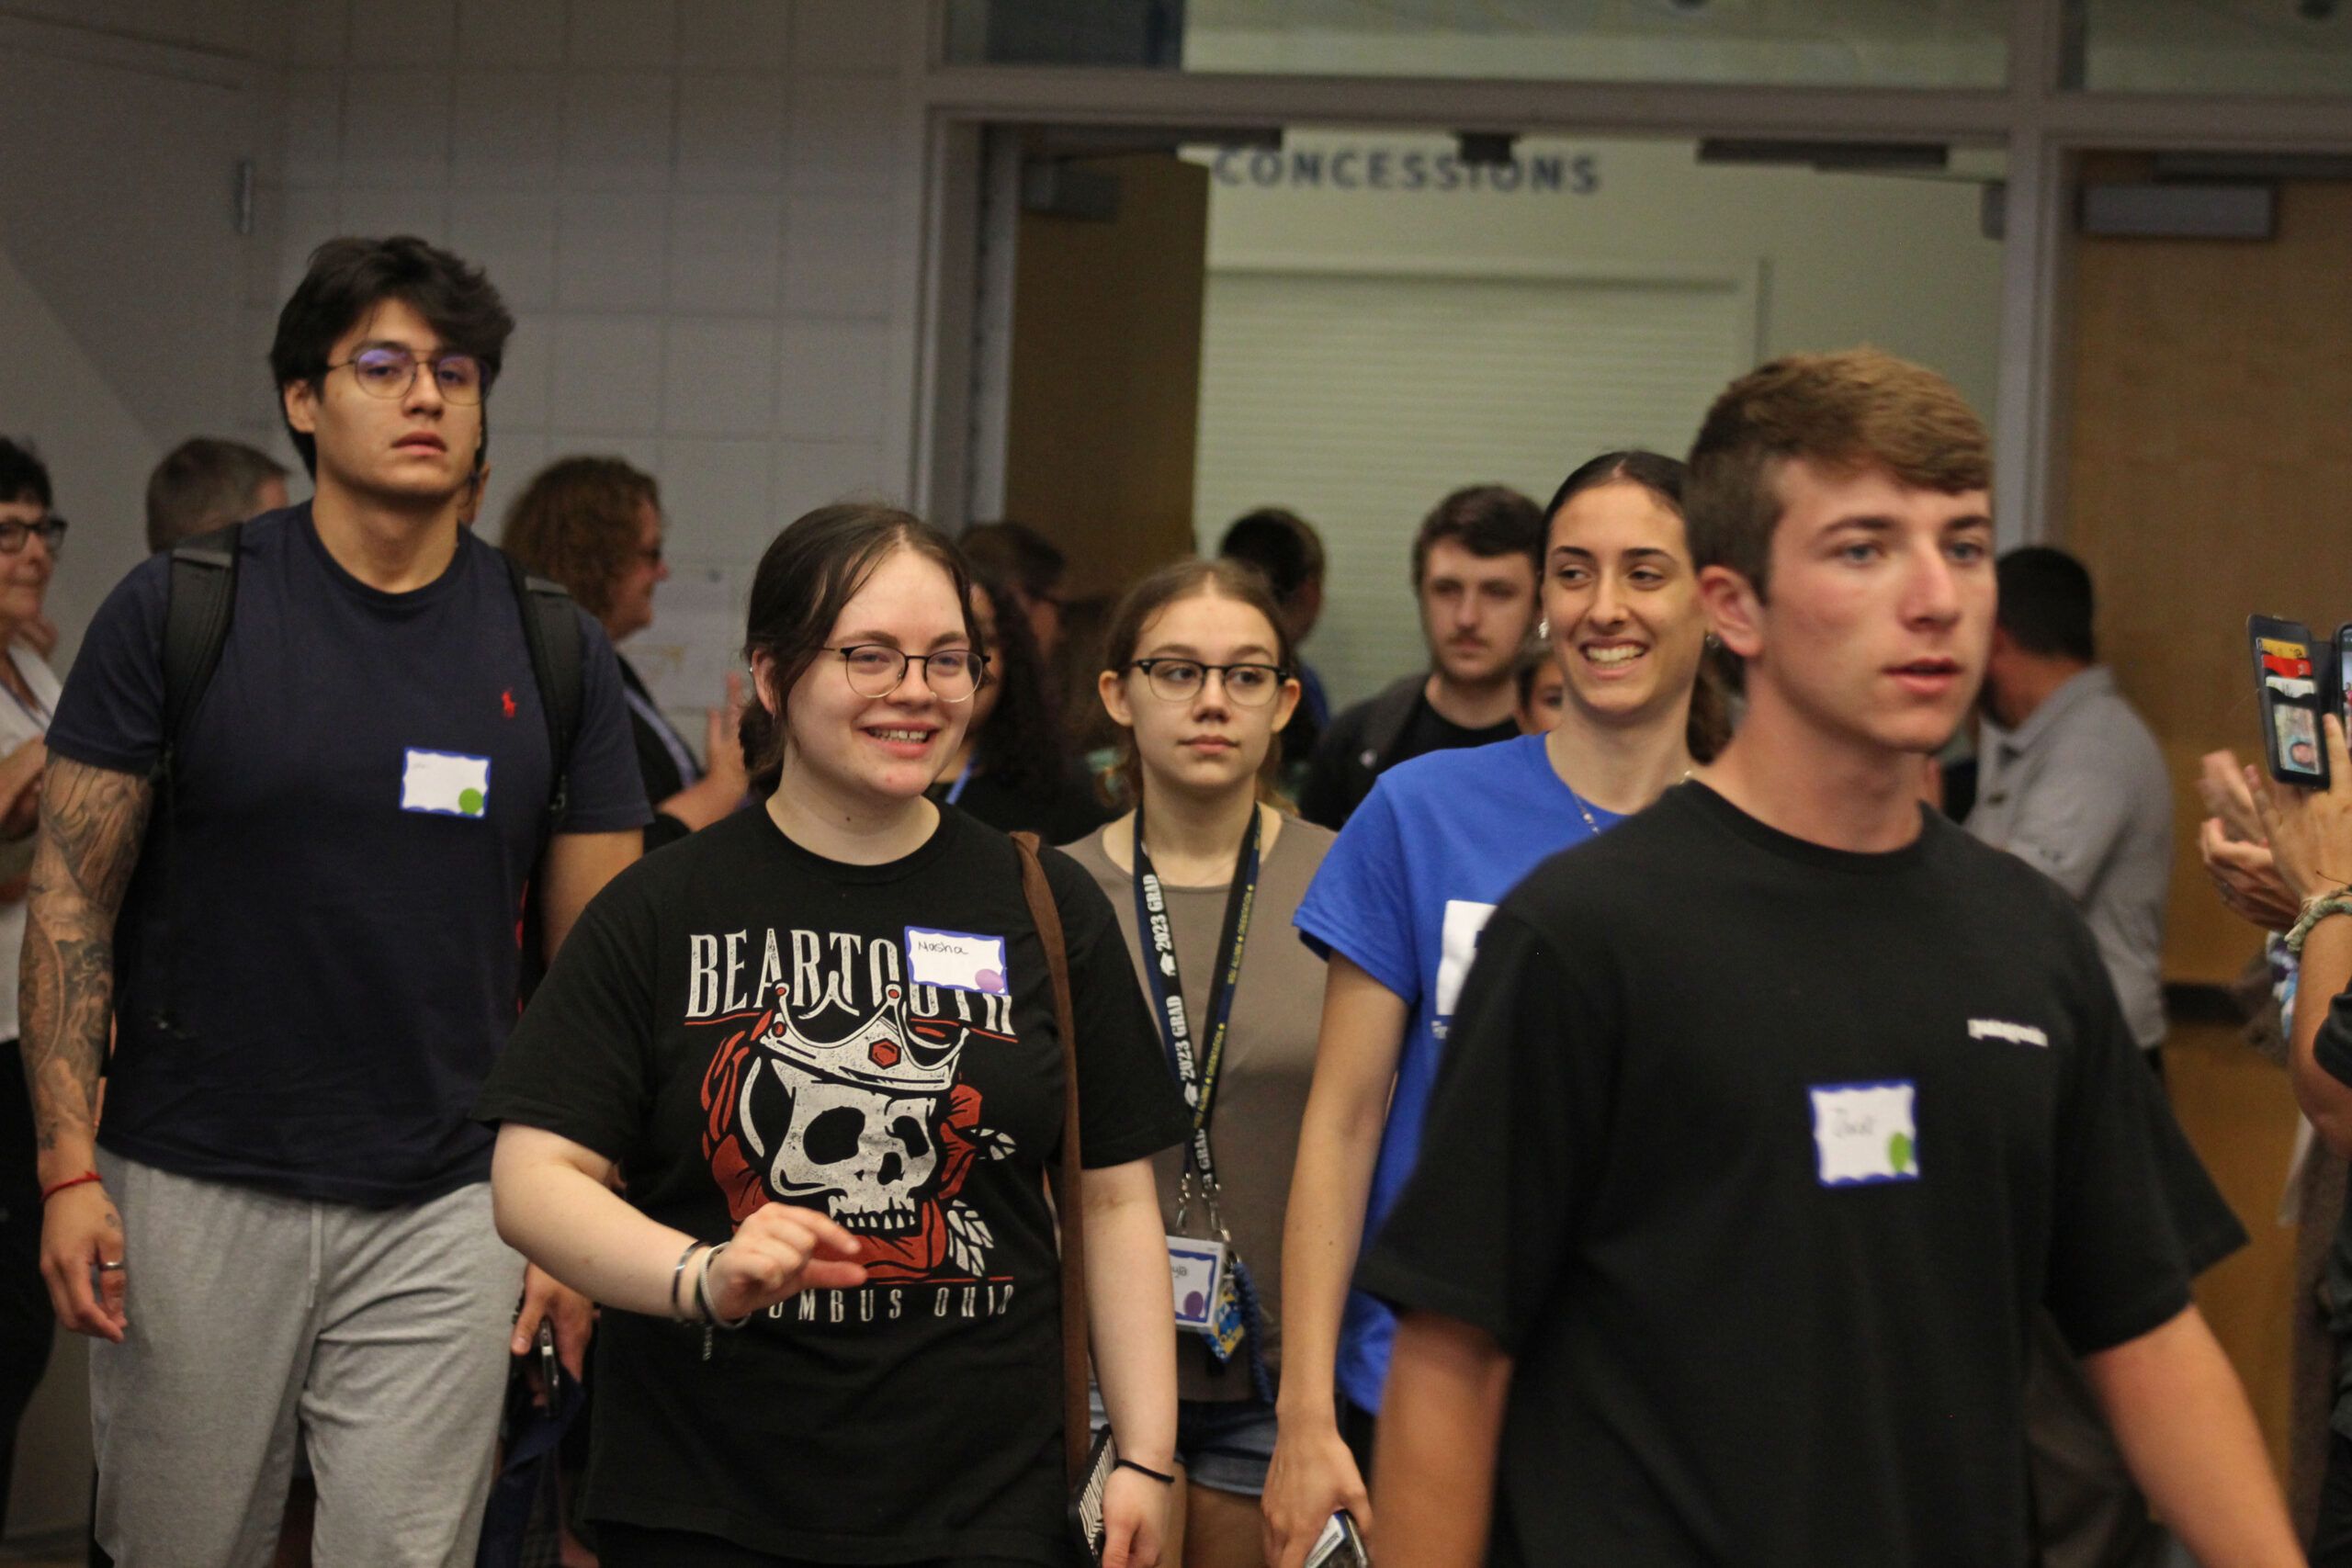 A group of people, mostly young adults, walking indoors. They are wearing casual clothes with name tags visible on their shirts. The sign "Concessions" hangs in the background, suggesting a break during an Academic Convocation event.